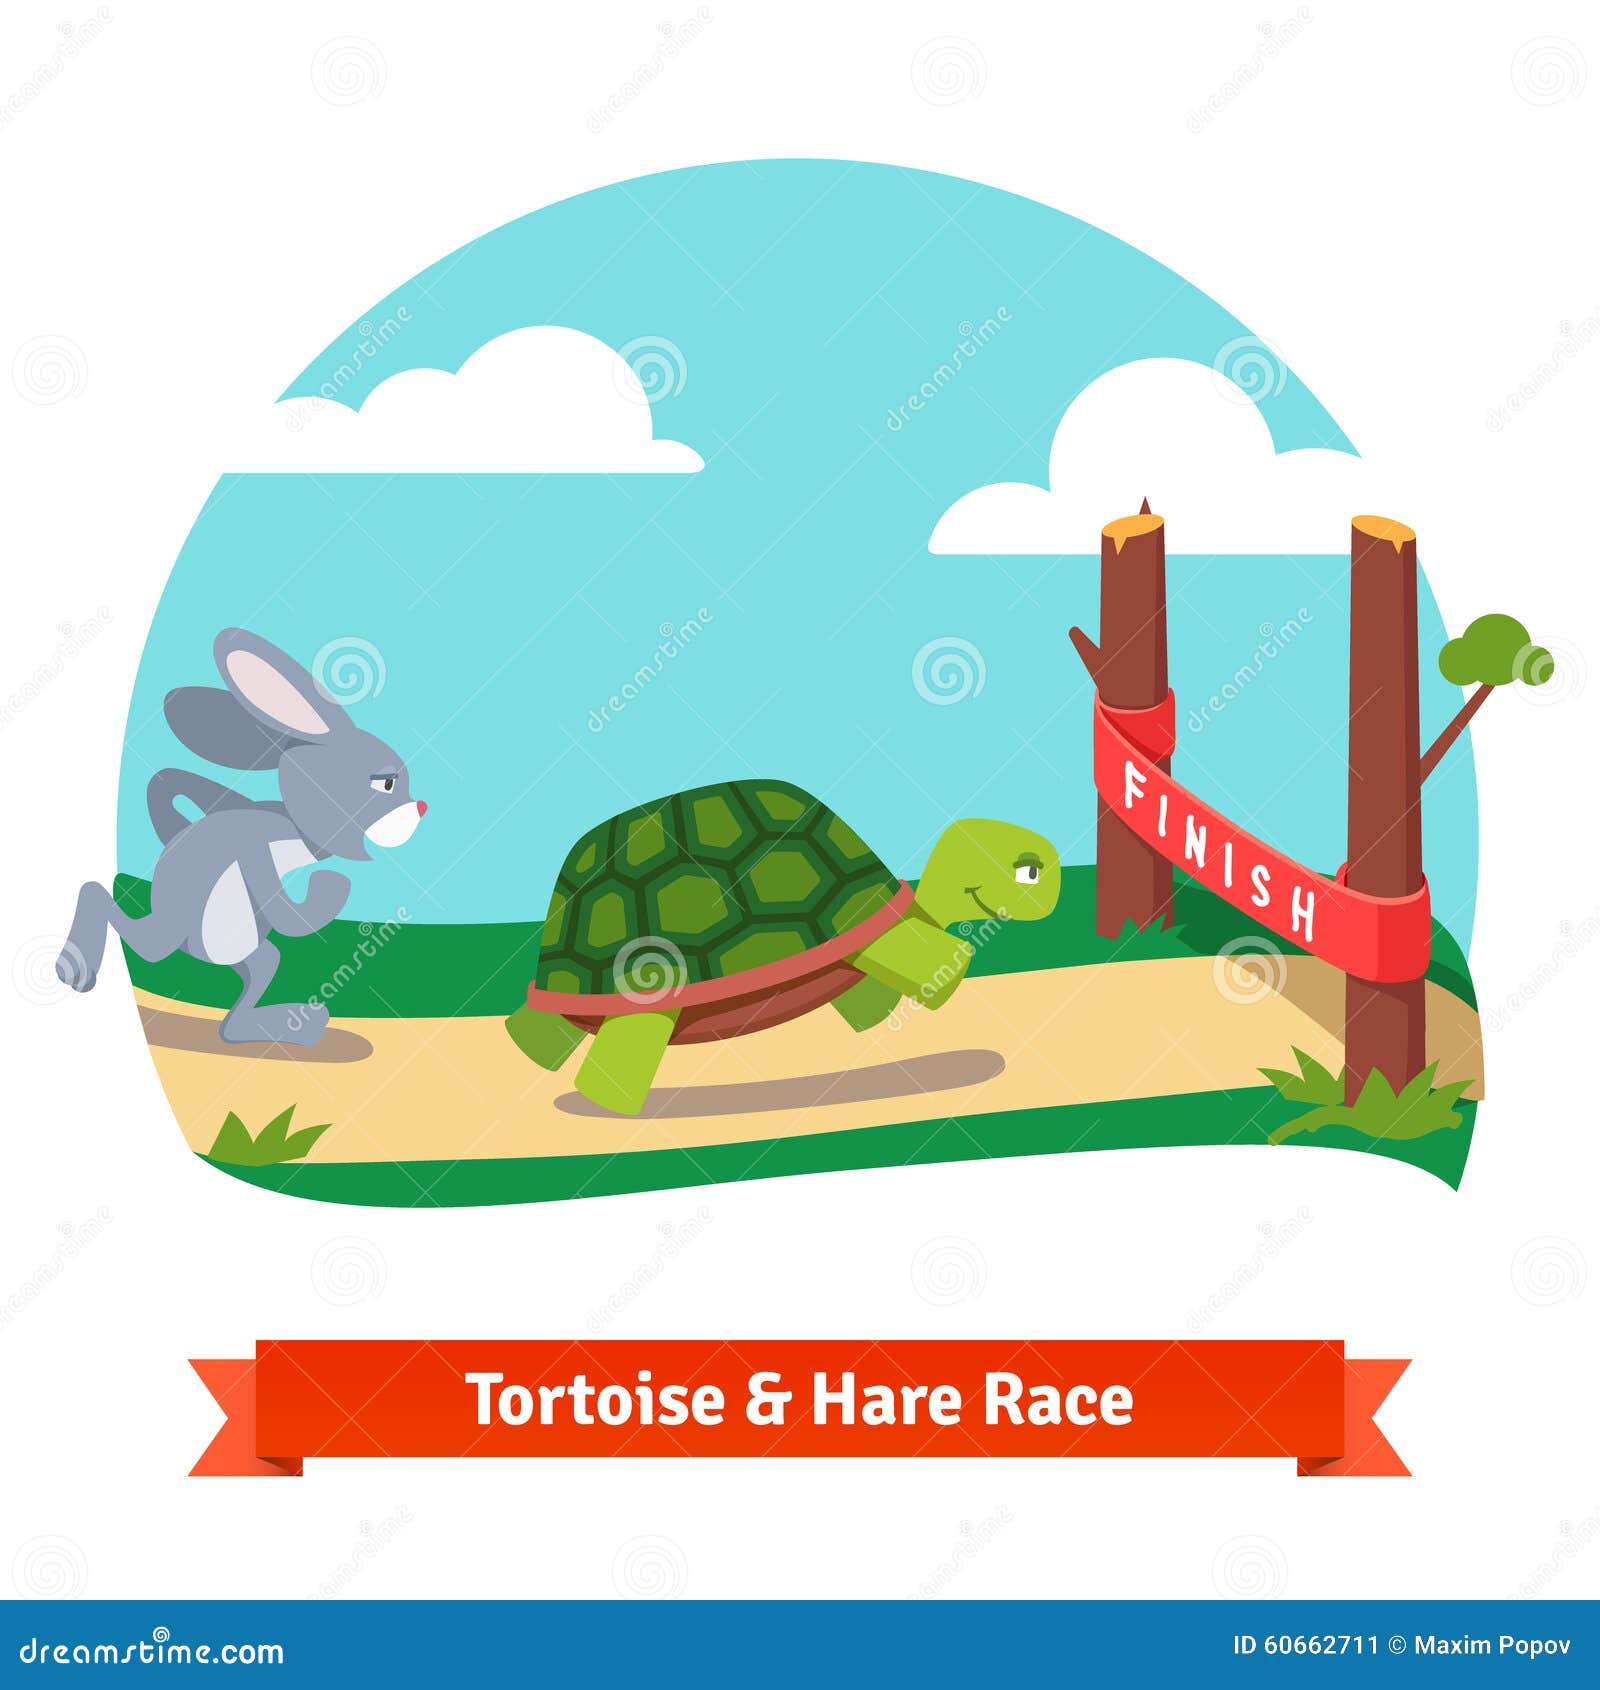 the tortoise and the hare racing together to win